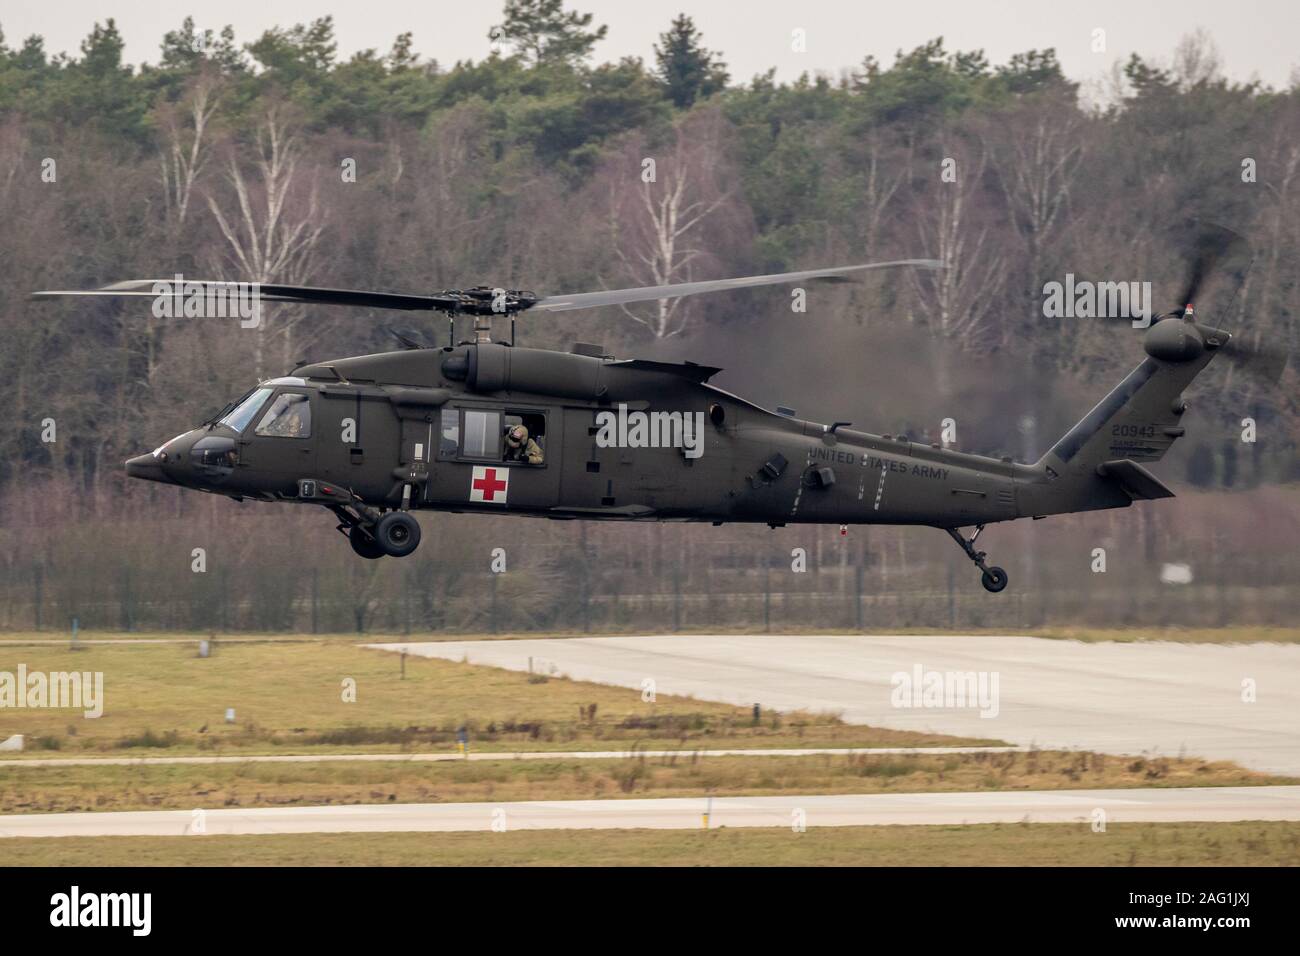 EINDHOVEN, THE NETHERLANDS - FEB 4, 2019: United States Army Sikorsky HH-60M Blackhawk transport helicopter in flight. Stock Photo